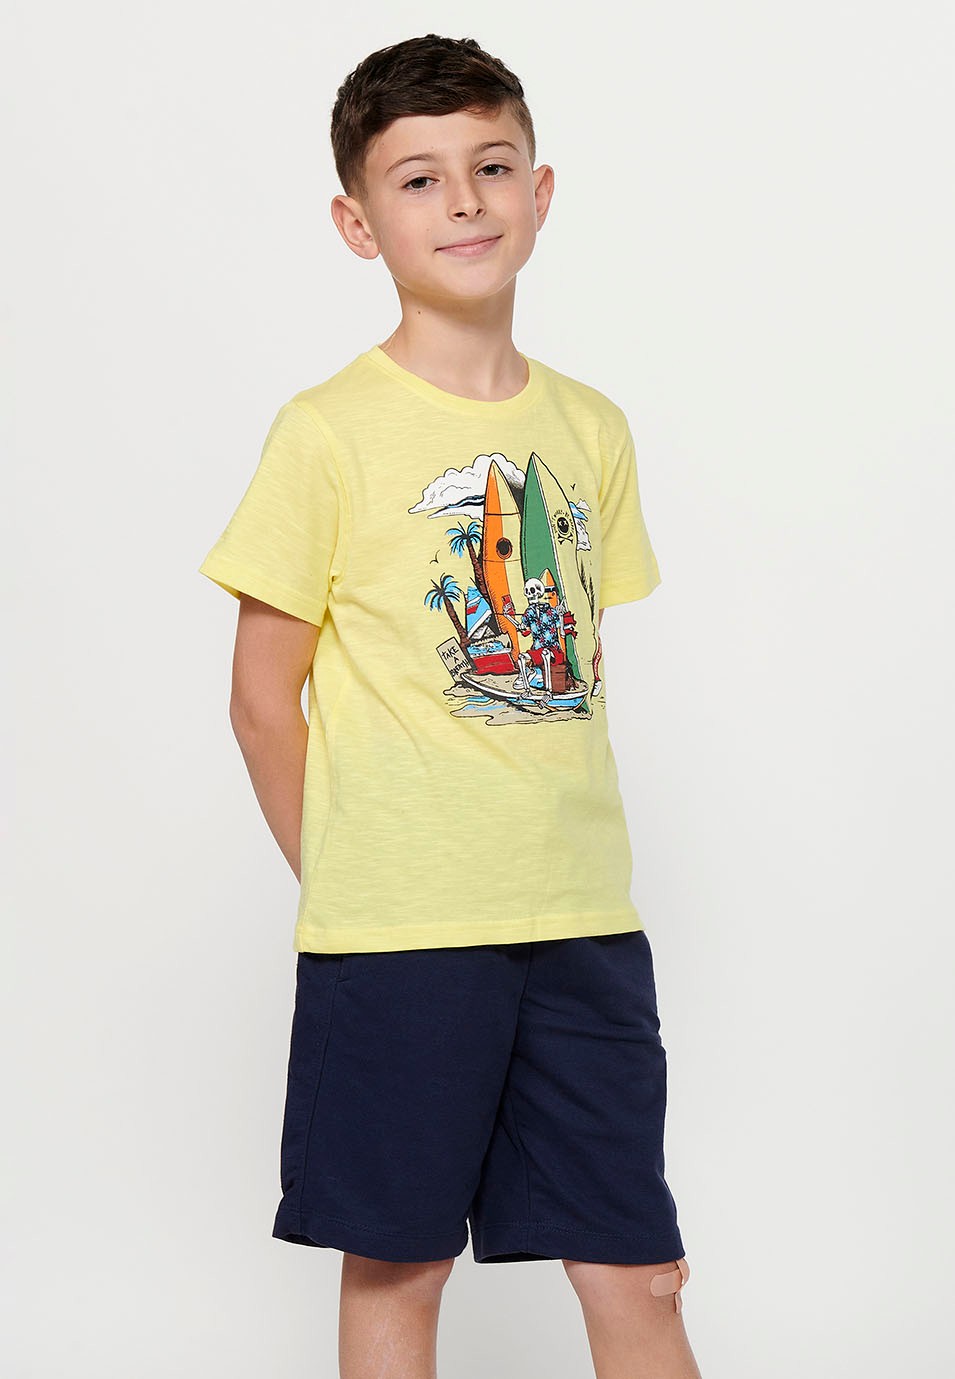 Short-sleeved cotton T-shirt with a round neckline. Yellow front print for Boys